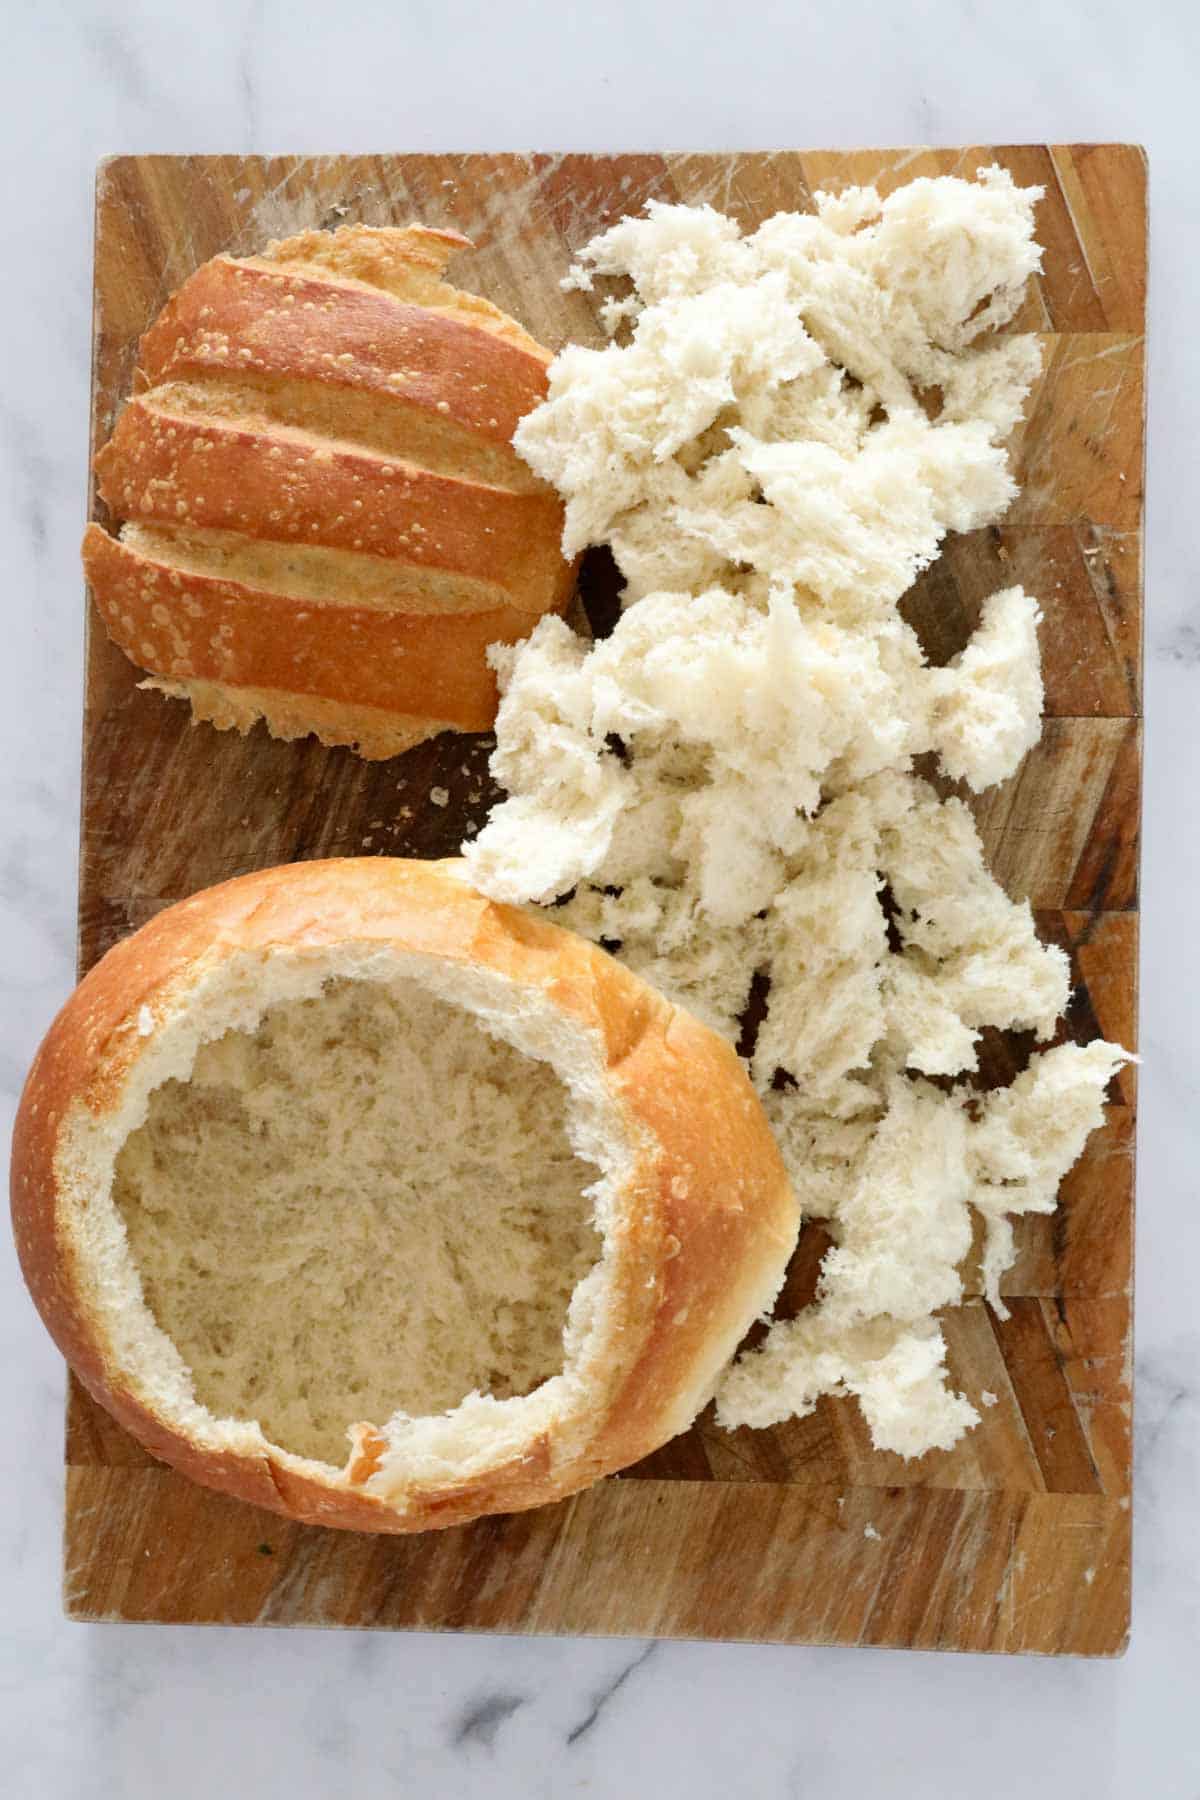 The top of a cob loaf cut off and hollowed, with the bread inside taken out in small pieces.